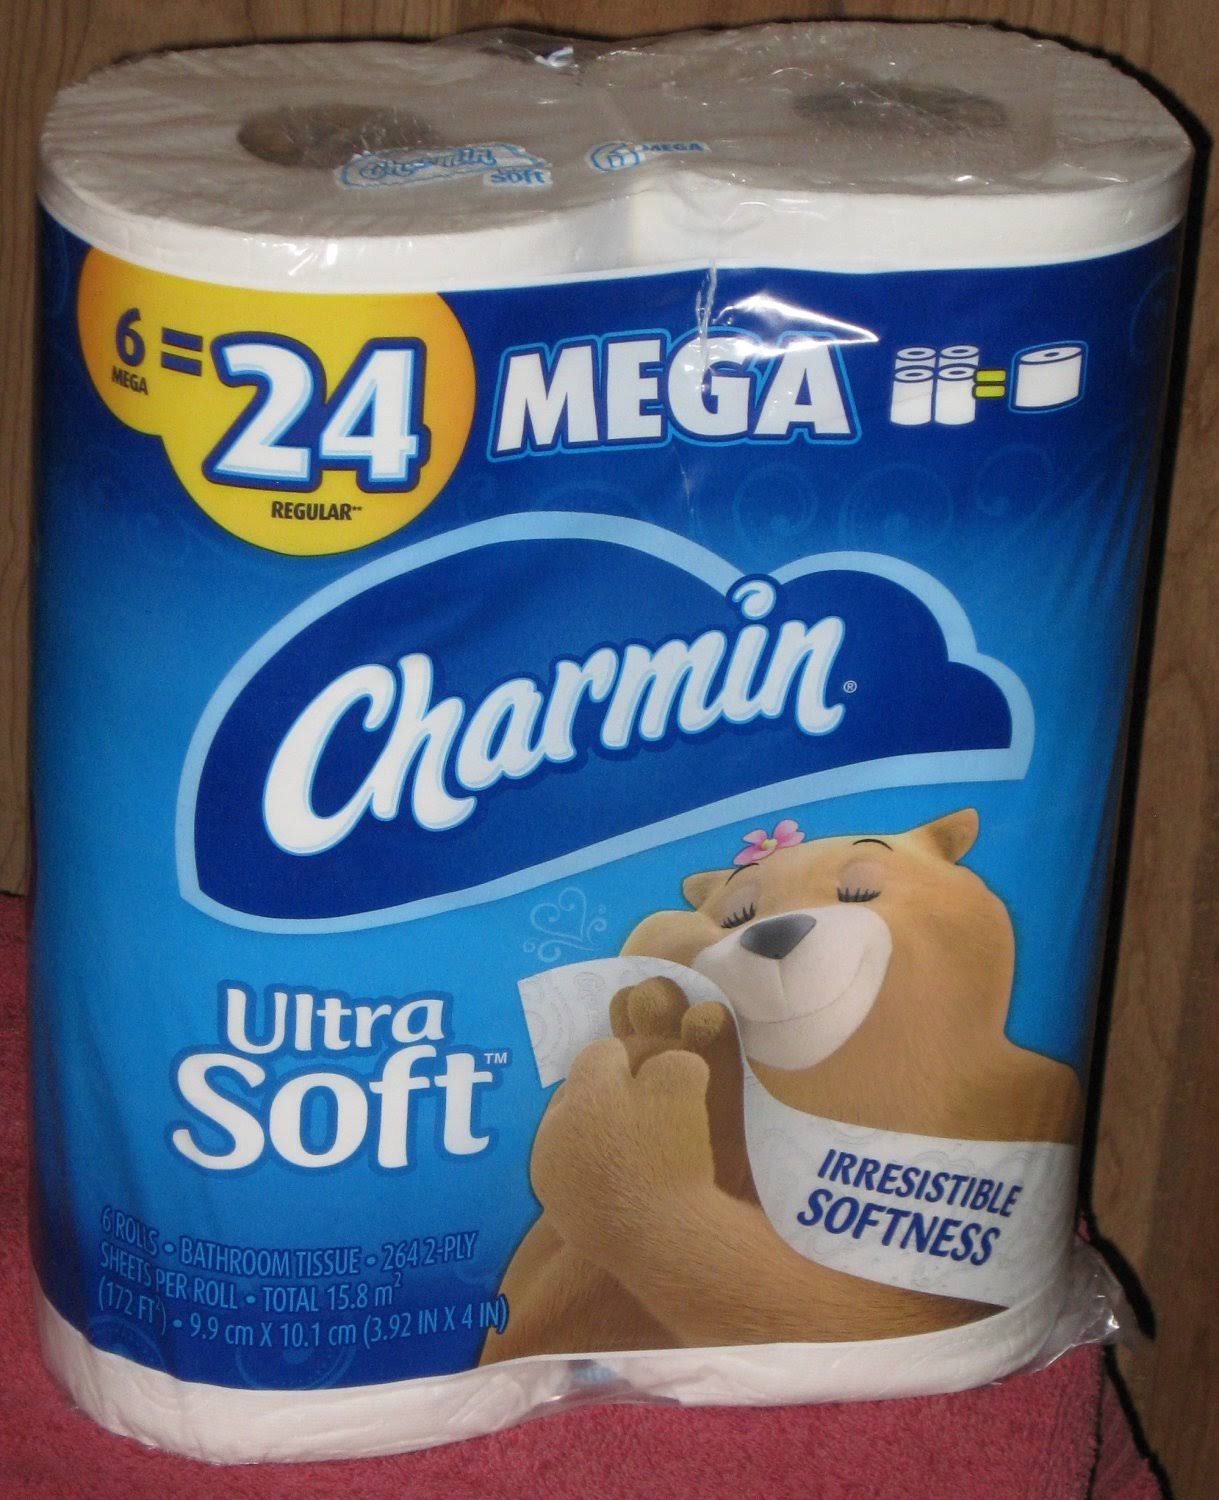 (1) Package of (6) Mega Rolls Ultra Soft Charmin Toilet Paper 6=24